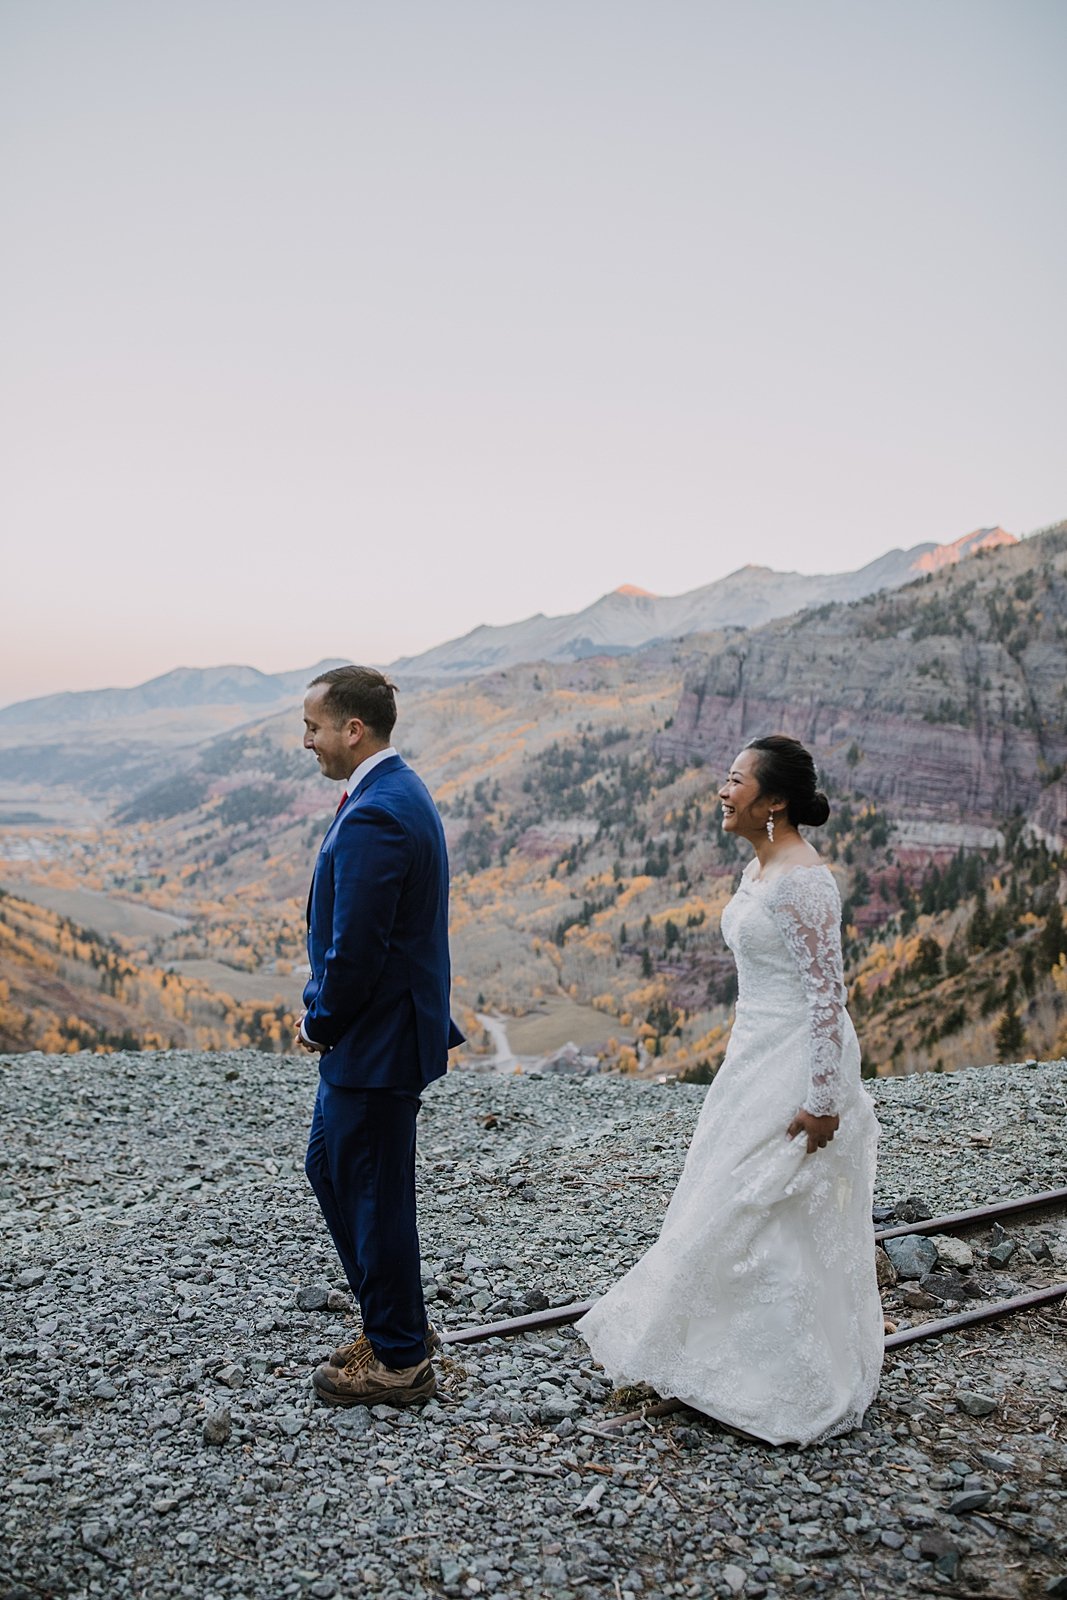 bride and groom first look, bride and groom on a cliff edge, cliffside elopement, mountain climbing elopement, colorado climbing elopement, southern colorado elopement